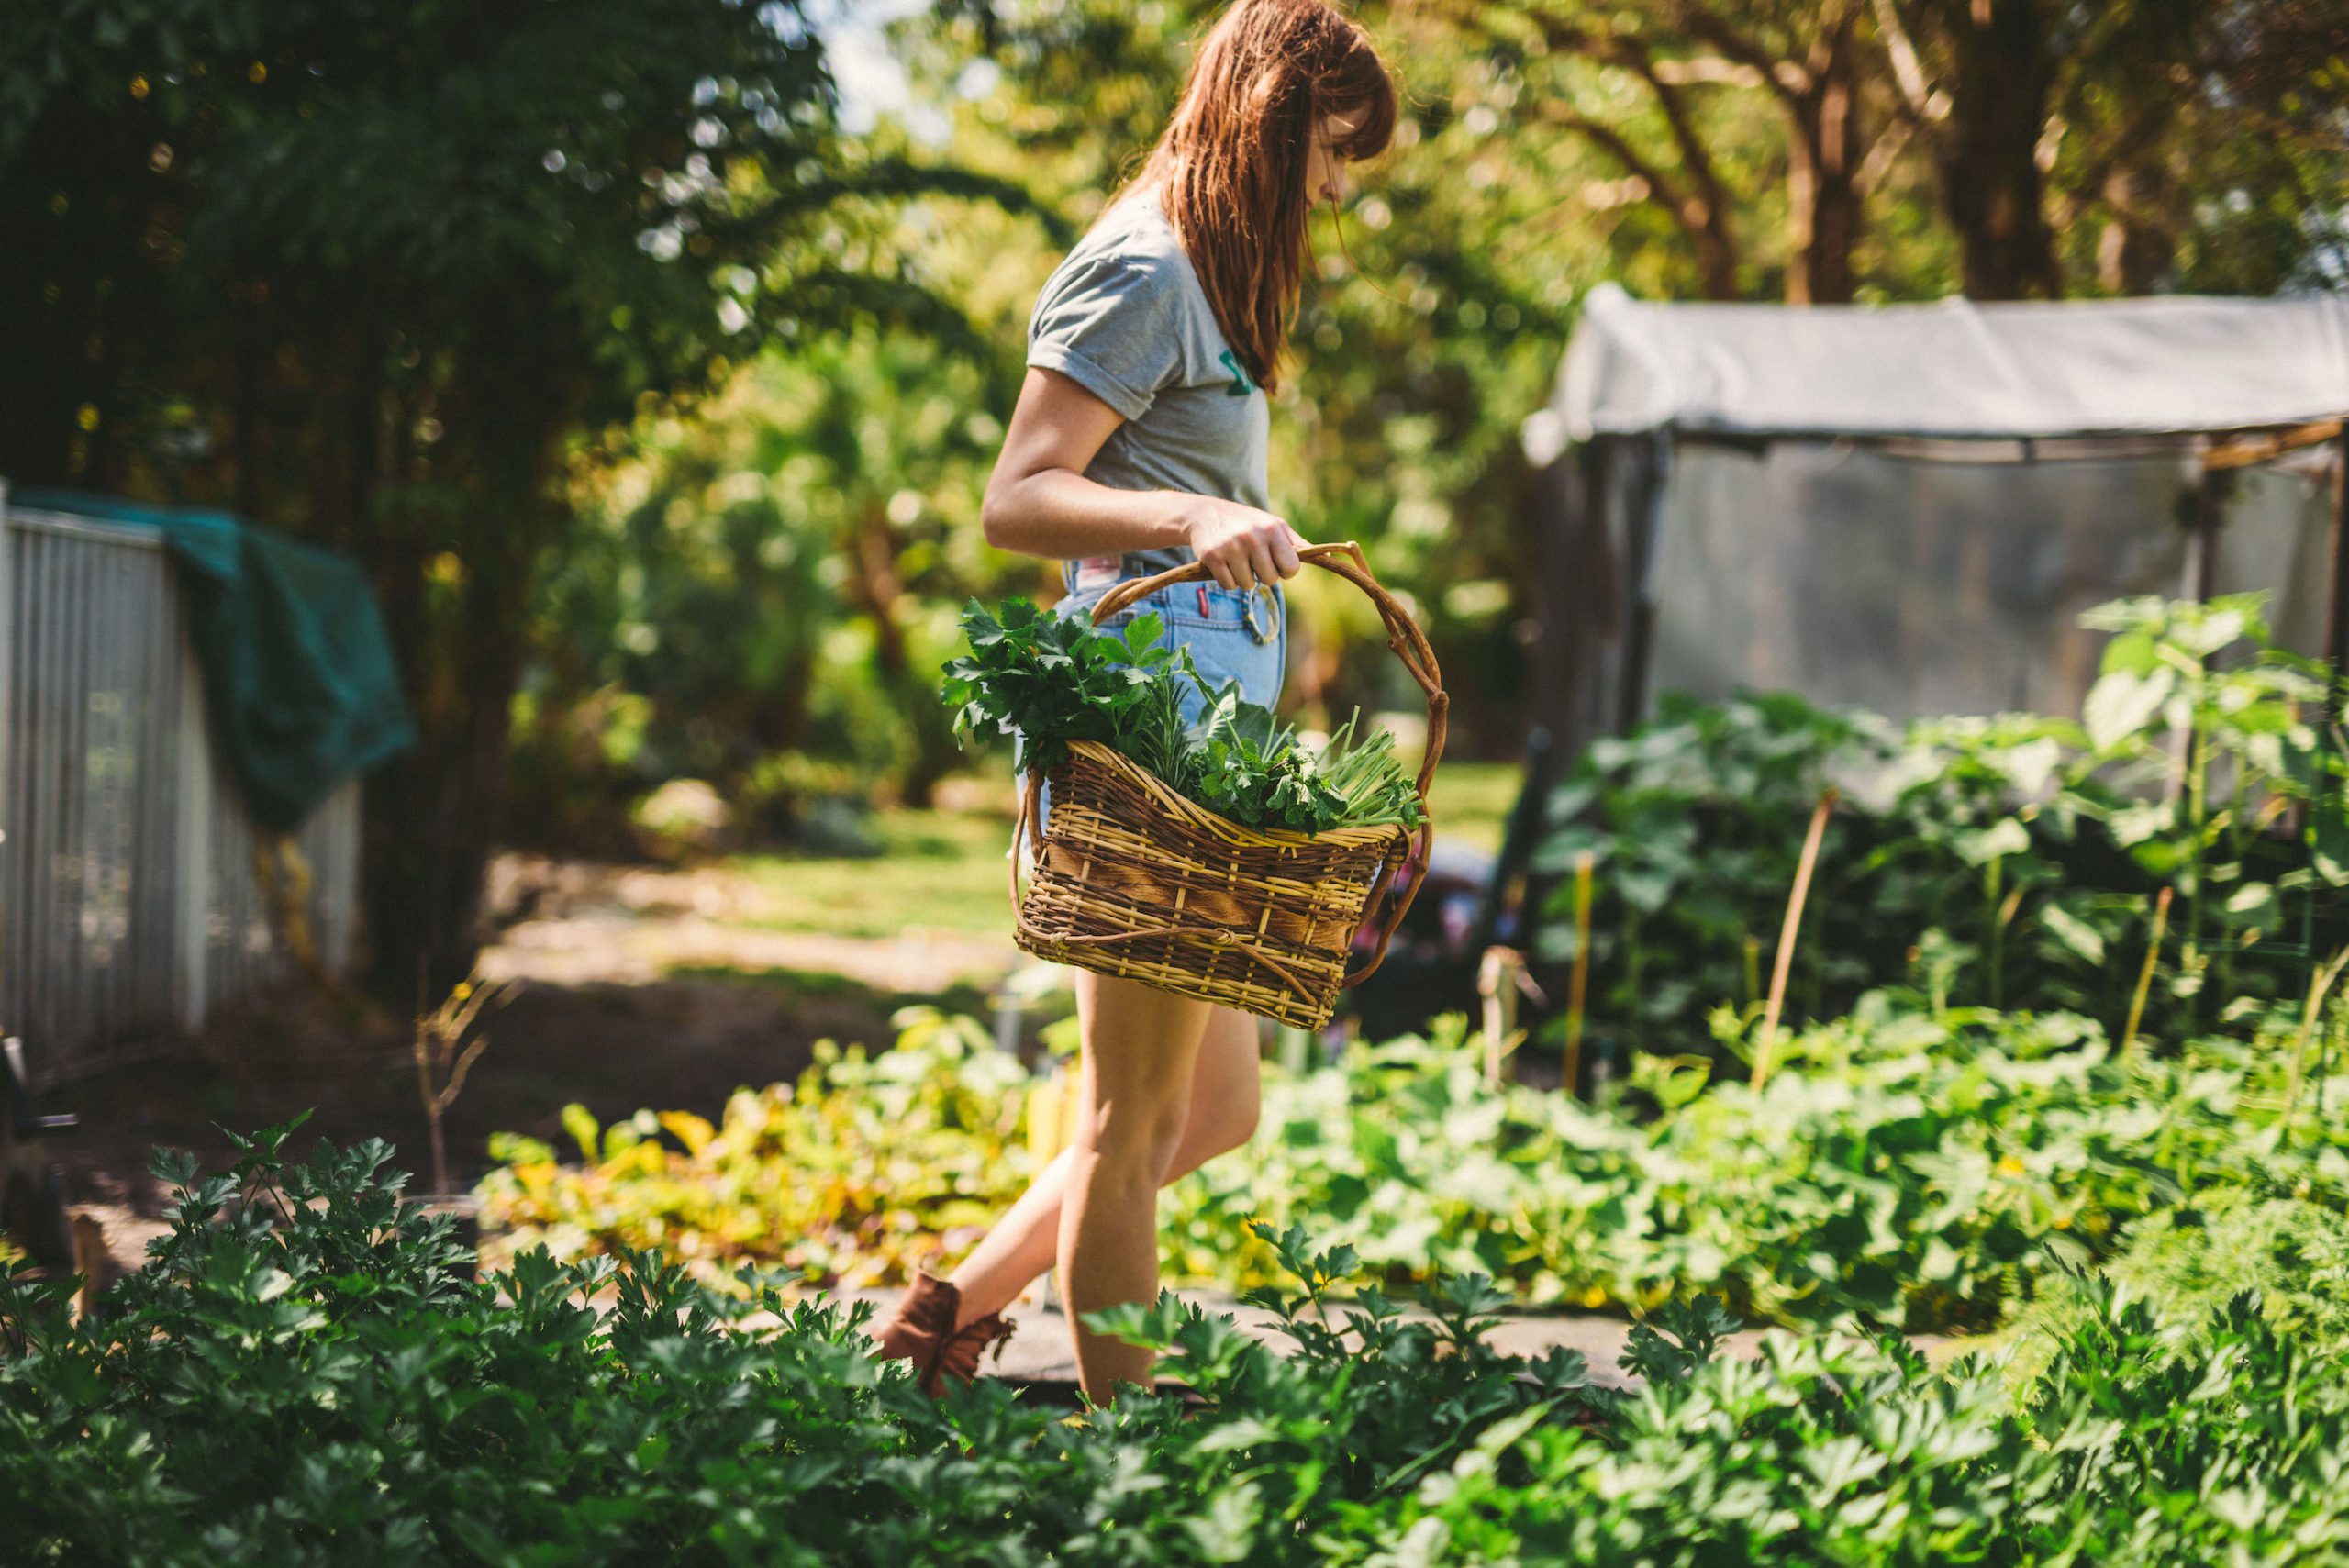 IU C&I Studios Portfolio Fresh First Website Header Side profile of a woman with reddish brown hair walking through a garden holding a basket filled with produce